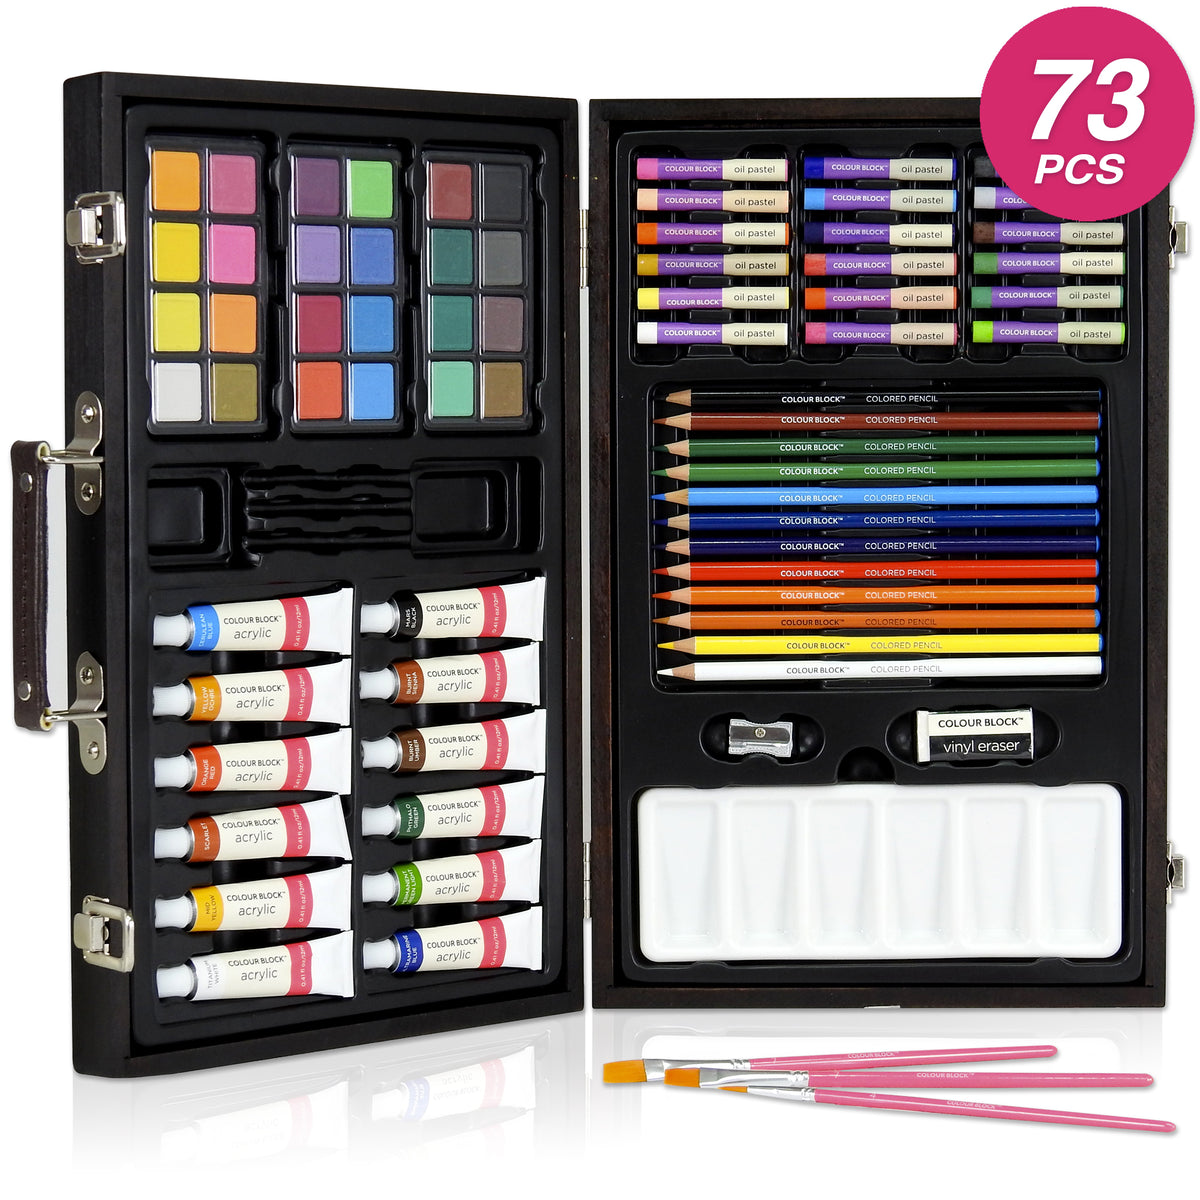 Premium 73 Piece Art Set for Adults & Kids | Painting and Drawing Kit for  Teens and Children | All-in-One Craft Paint Set with Colored Pencils